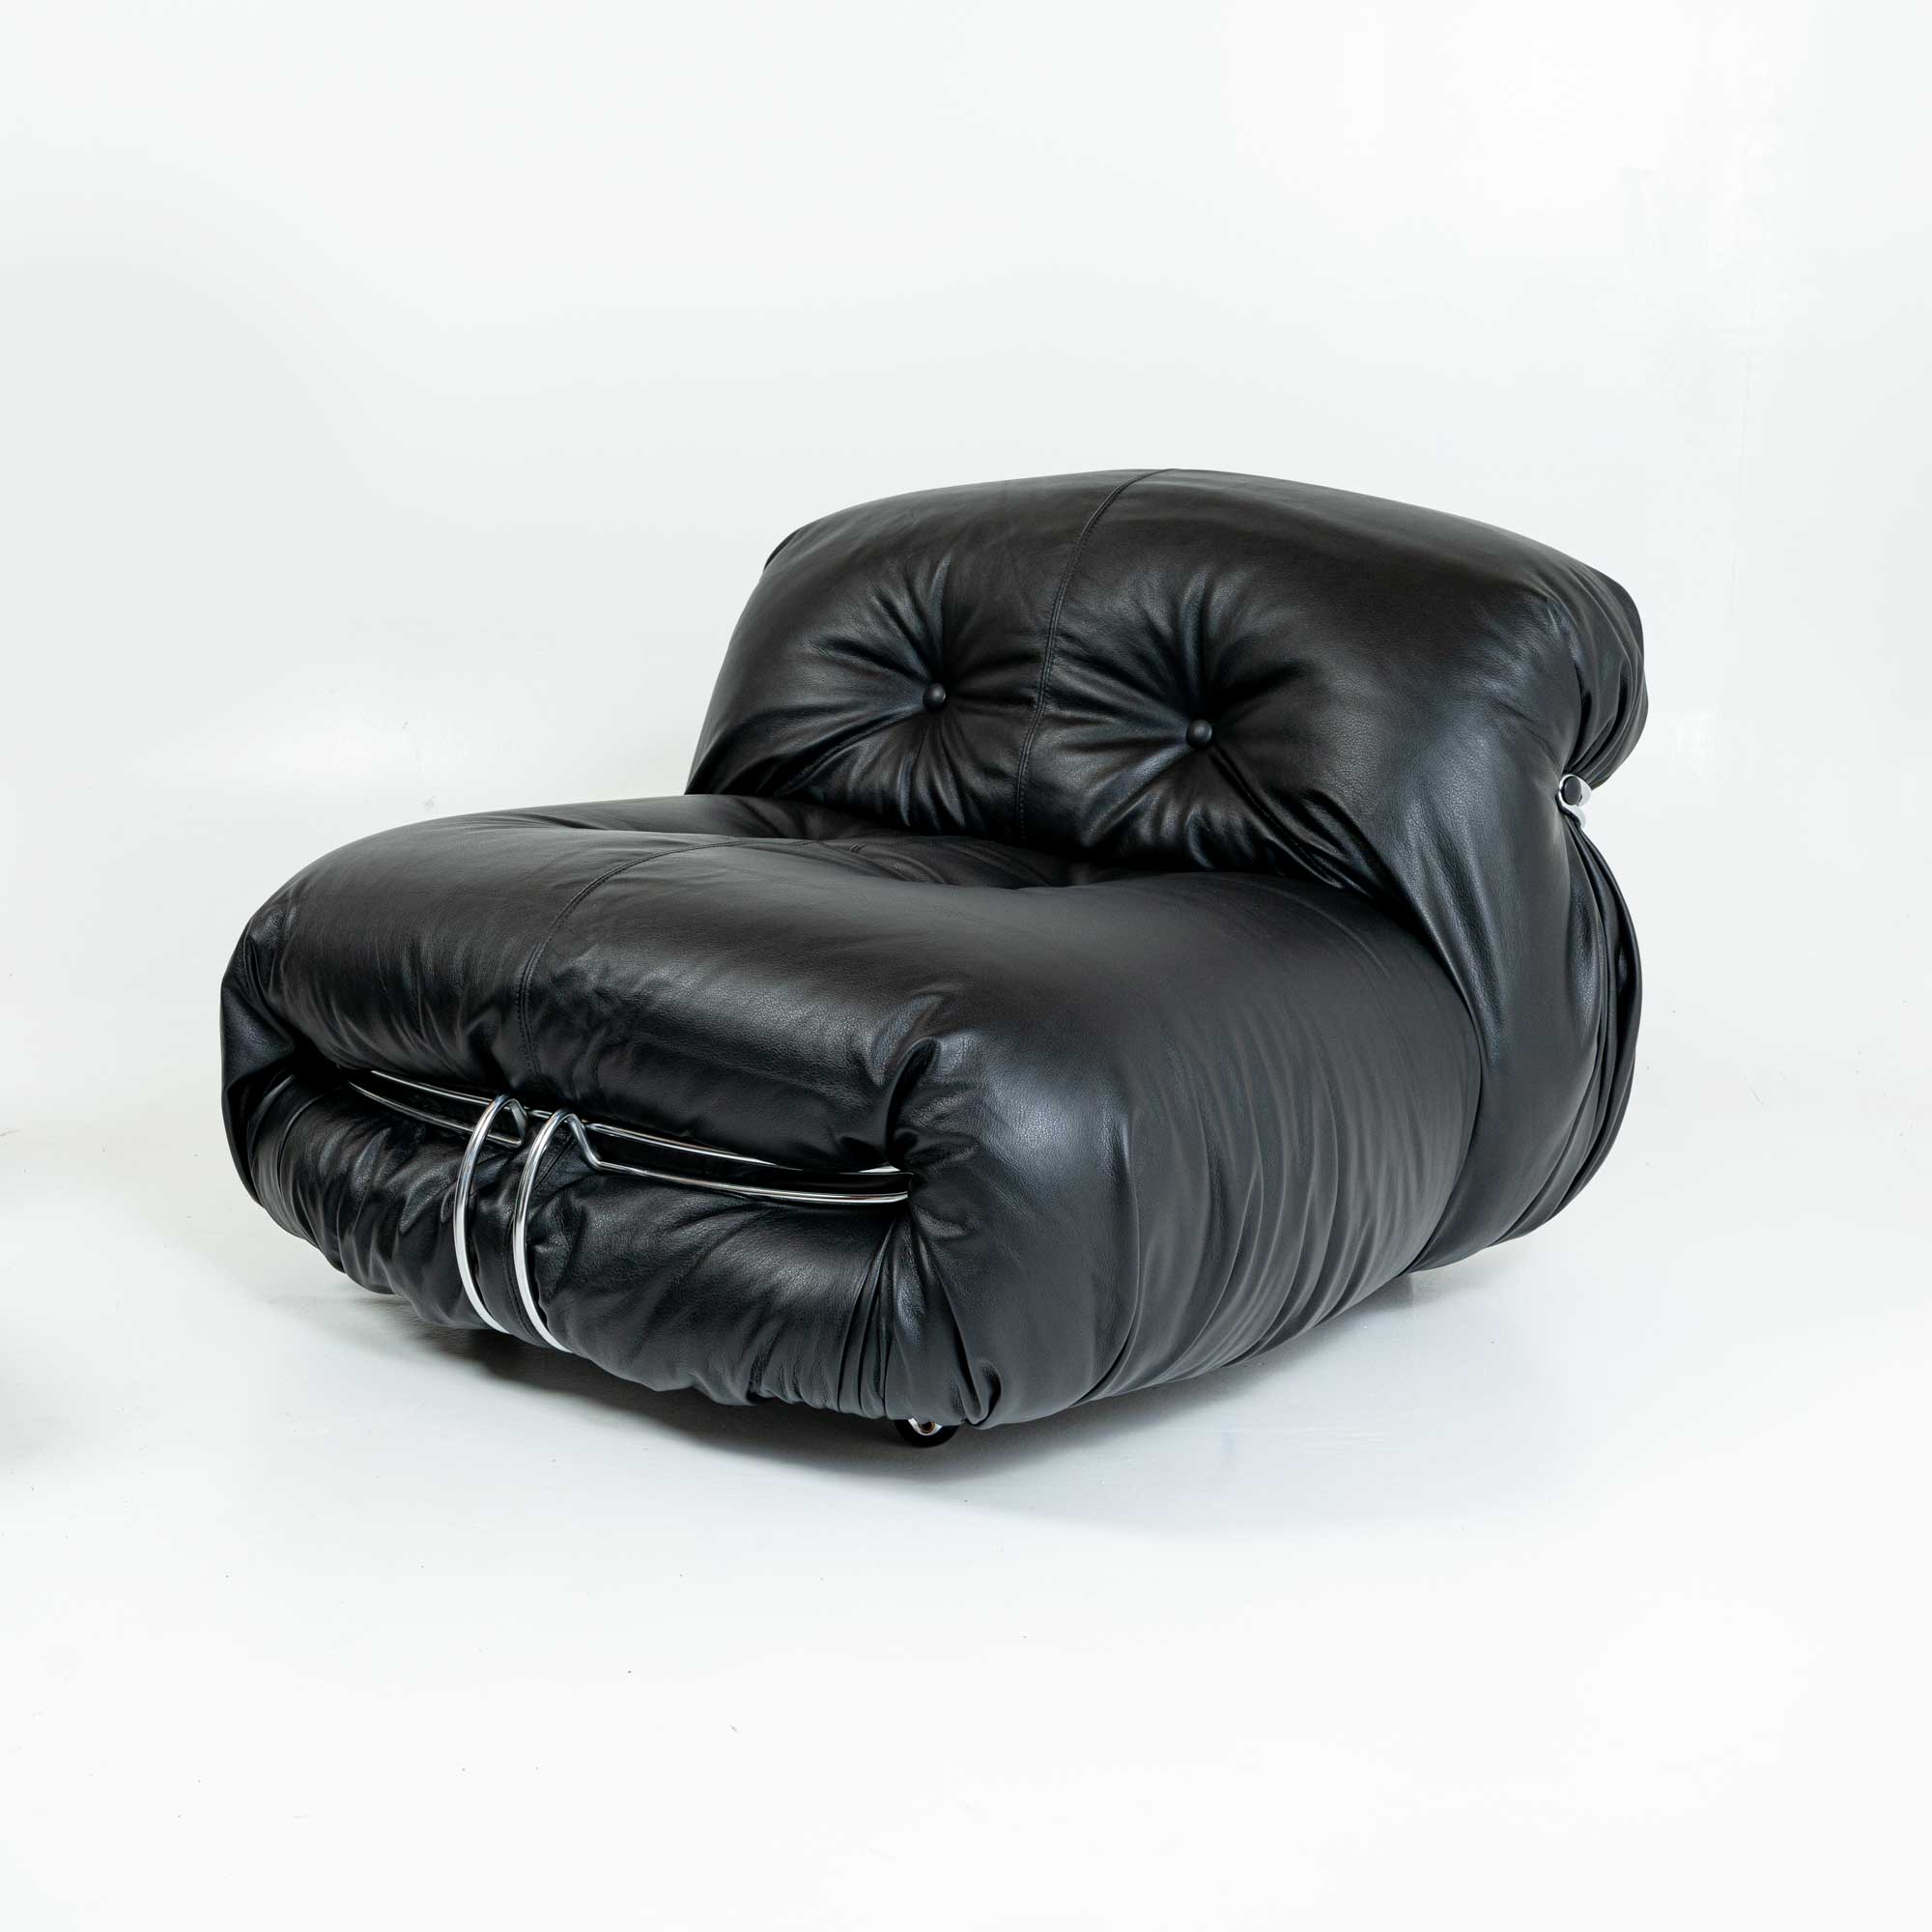 Soriana Lounge Chair by Afra & Tobia Scarpa for Cassina 1970s in black leather